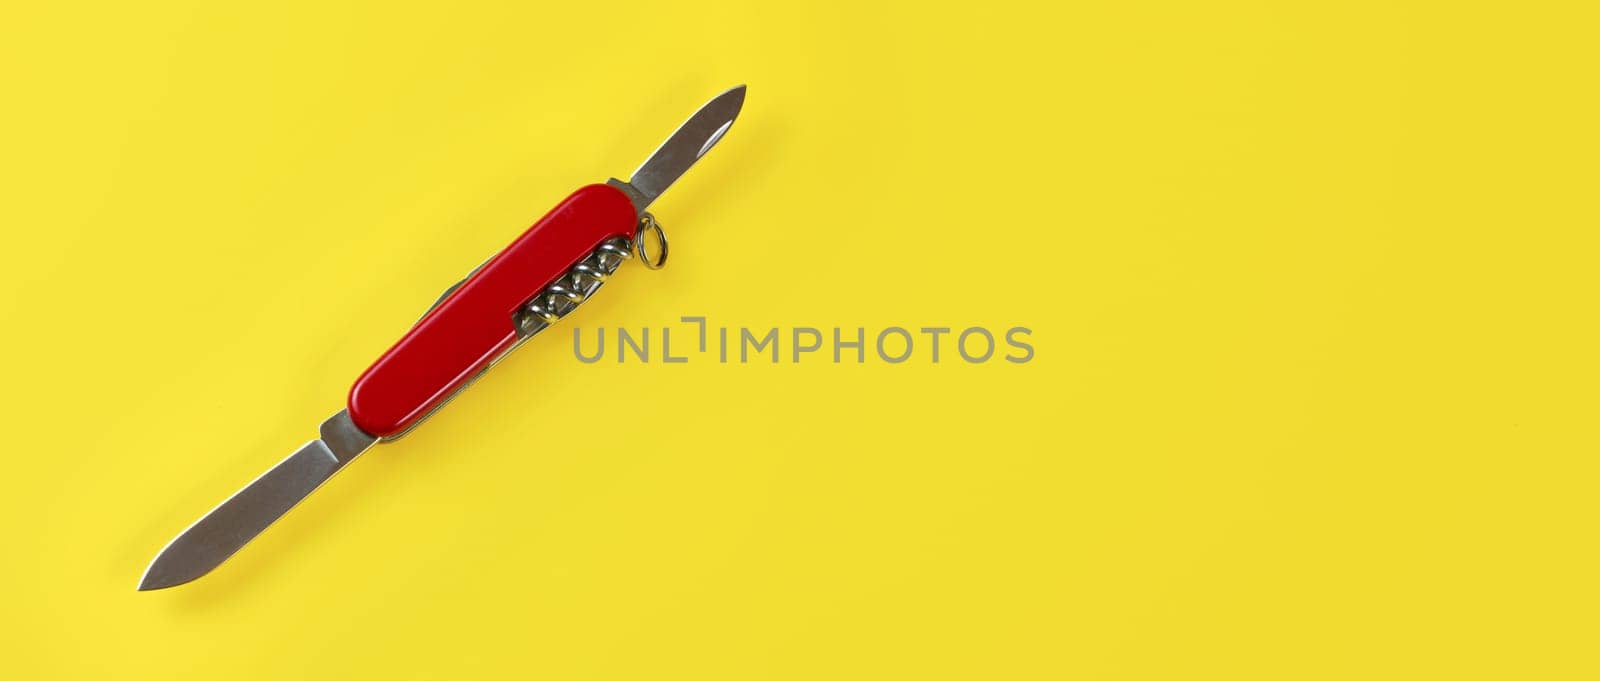 Table top view, red pocket knife with both blades opened, on yellow board. Space for text on right. by Ivanko